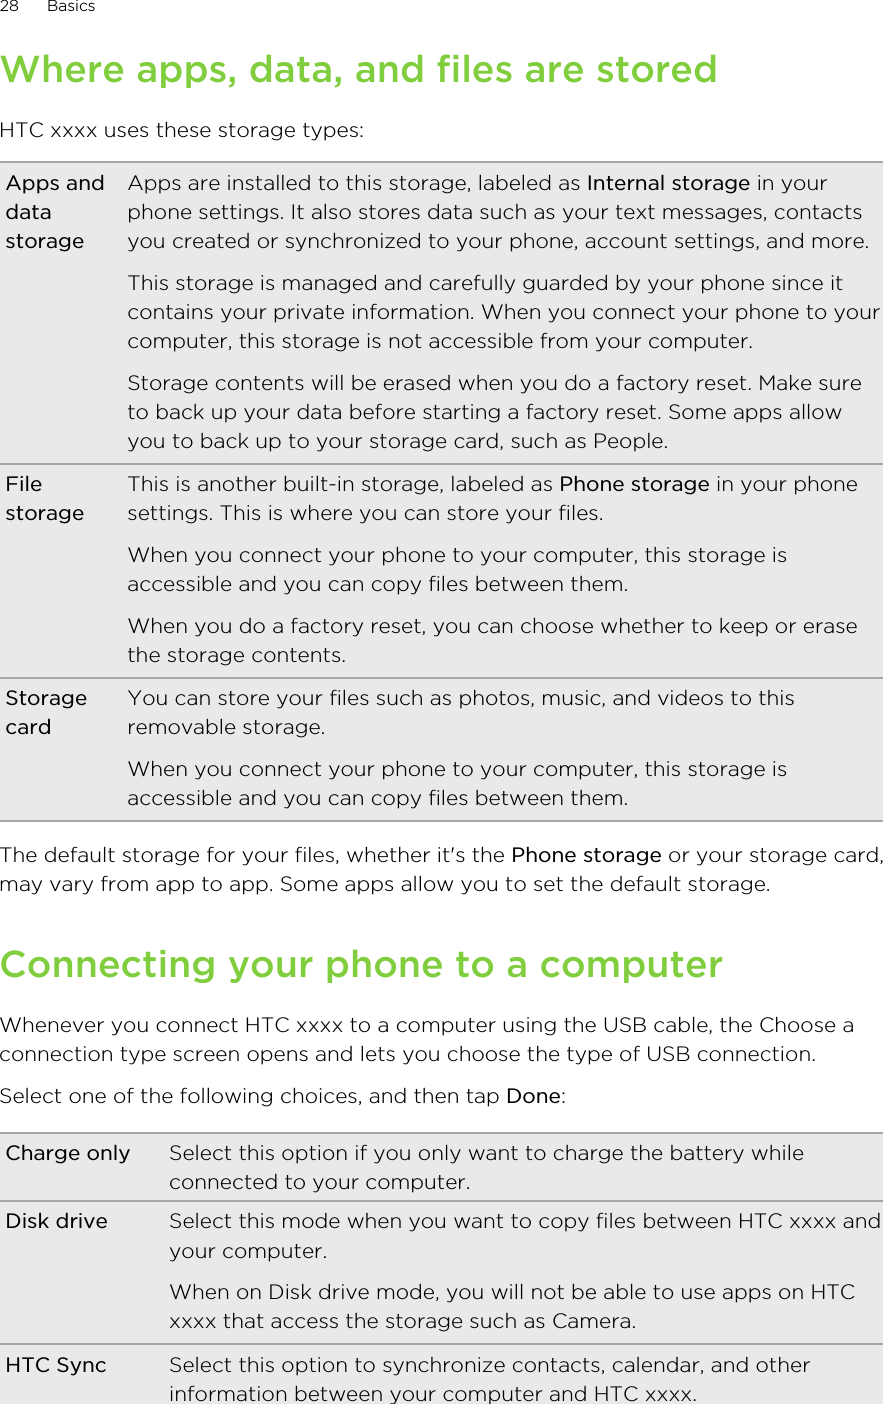 Where apps, data, and files are storedHTC xxxx uses these storage types:Apps anddatastorageApps are installed to this storage, labeled as Internal storage in yourphone settings. It also stores data such as your text messages, contactsyou created or synchronized to your phone, account settings, and more.This storage is managed and carefully guarded by your phone since itcontains your private information. When you connect your phone to yourcomputer, this storage is not accessible from your computer.Storage contents will be erased when you do a factory reset. Make sureto back up your data before starting a factory reset. Some apps allowyou to back up to your storage card, such as People.FilestorageThis is another built-in storage, labeled as Phone storage in your phonesettings. This is where you can store your files.When you connect your phone to your computer, this storage isaccessible and you can copy files between them.When you do a factory reset, you can choose whether to keep or erasethe storage contents.StoragecardYou can store your files such as photos, music, and videos to thisremovable storage.When you connect your phone to your computer, this storage isaccessible and you can copy files between them.The default storage for your files, whether it&apos;s the Phone storage or your storage card,may vary from app to app. Some apps allow you to set the default storage.Connecting your phone to a computerWhenever you connect HTC xxxx to a computer using the USB cable, the Choose aconnection type screen opens and lets you choose the type of USB connection.Select one of the following choices, and then tap Done:Charge only Select this option if you only want to charge the battery whileconnected to your computer.Disk drive Select this mode when you want to copy files between HTC xxxx andyour computer.When on Disk drive mode, you will not be able to use apps on HTCxxxx that access the storage such as Camera.HTC Sync Select this option to synchronize contacts, calendar, and otherinformation between your computer and HTC xxxx.28 Basics